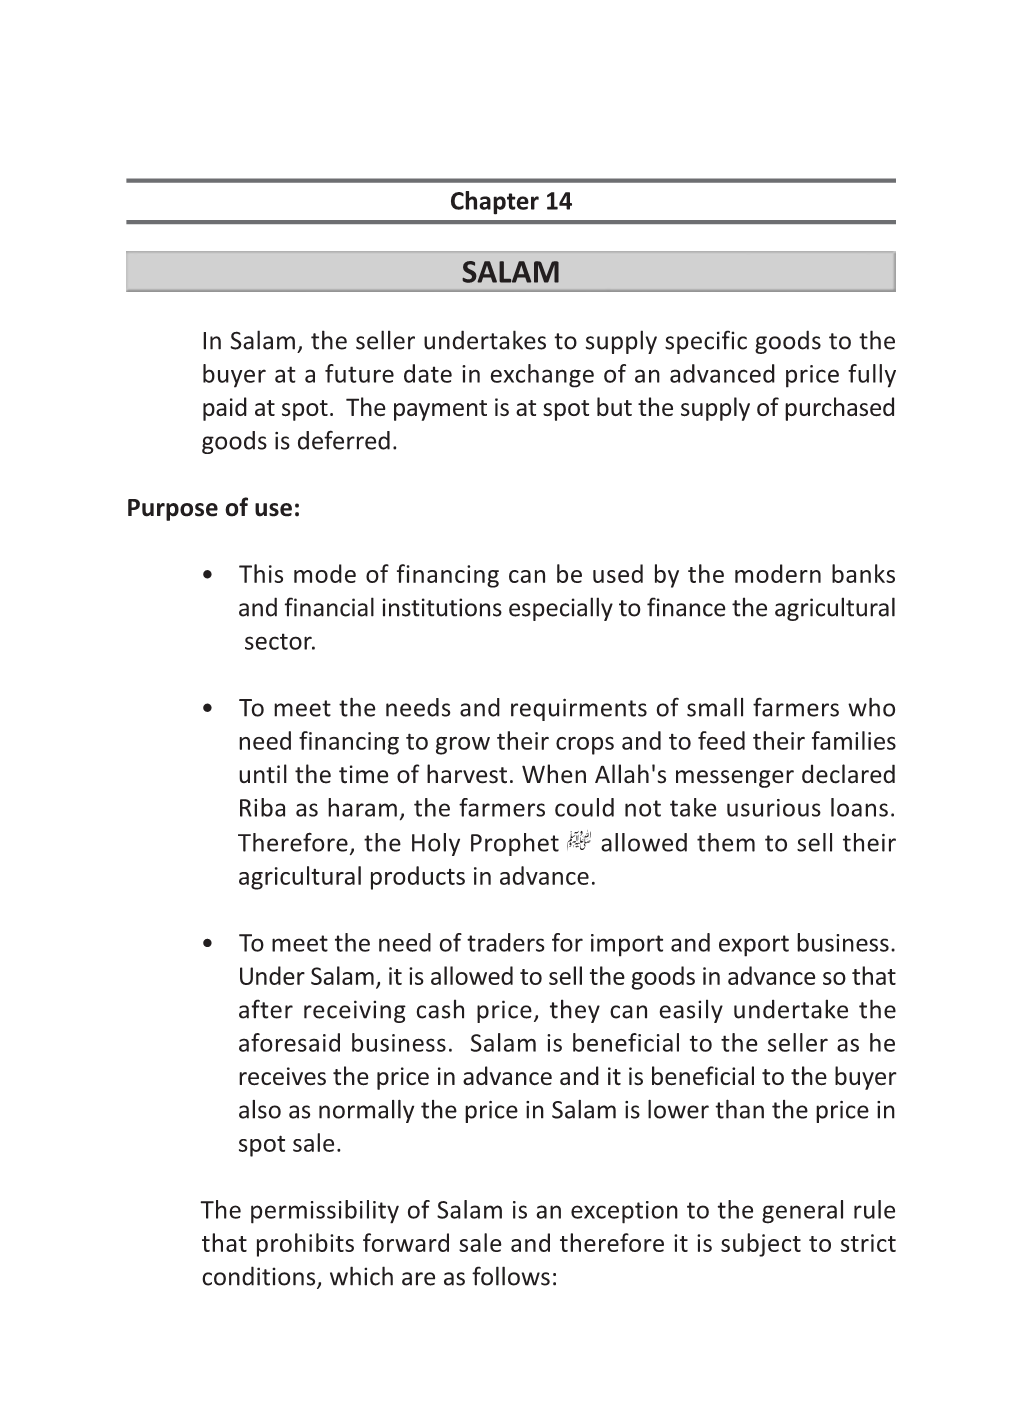 Chapter 14 in Salam, the Seller Undertakes to Supply Specific Goods